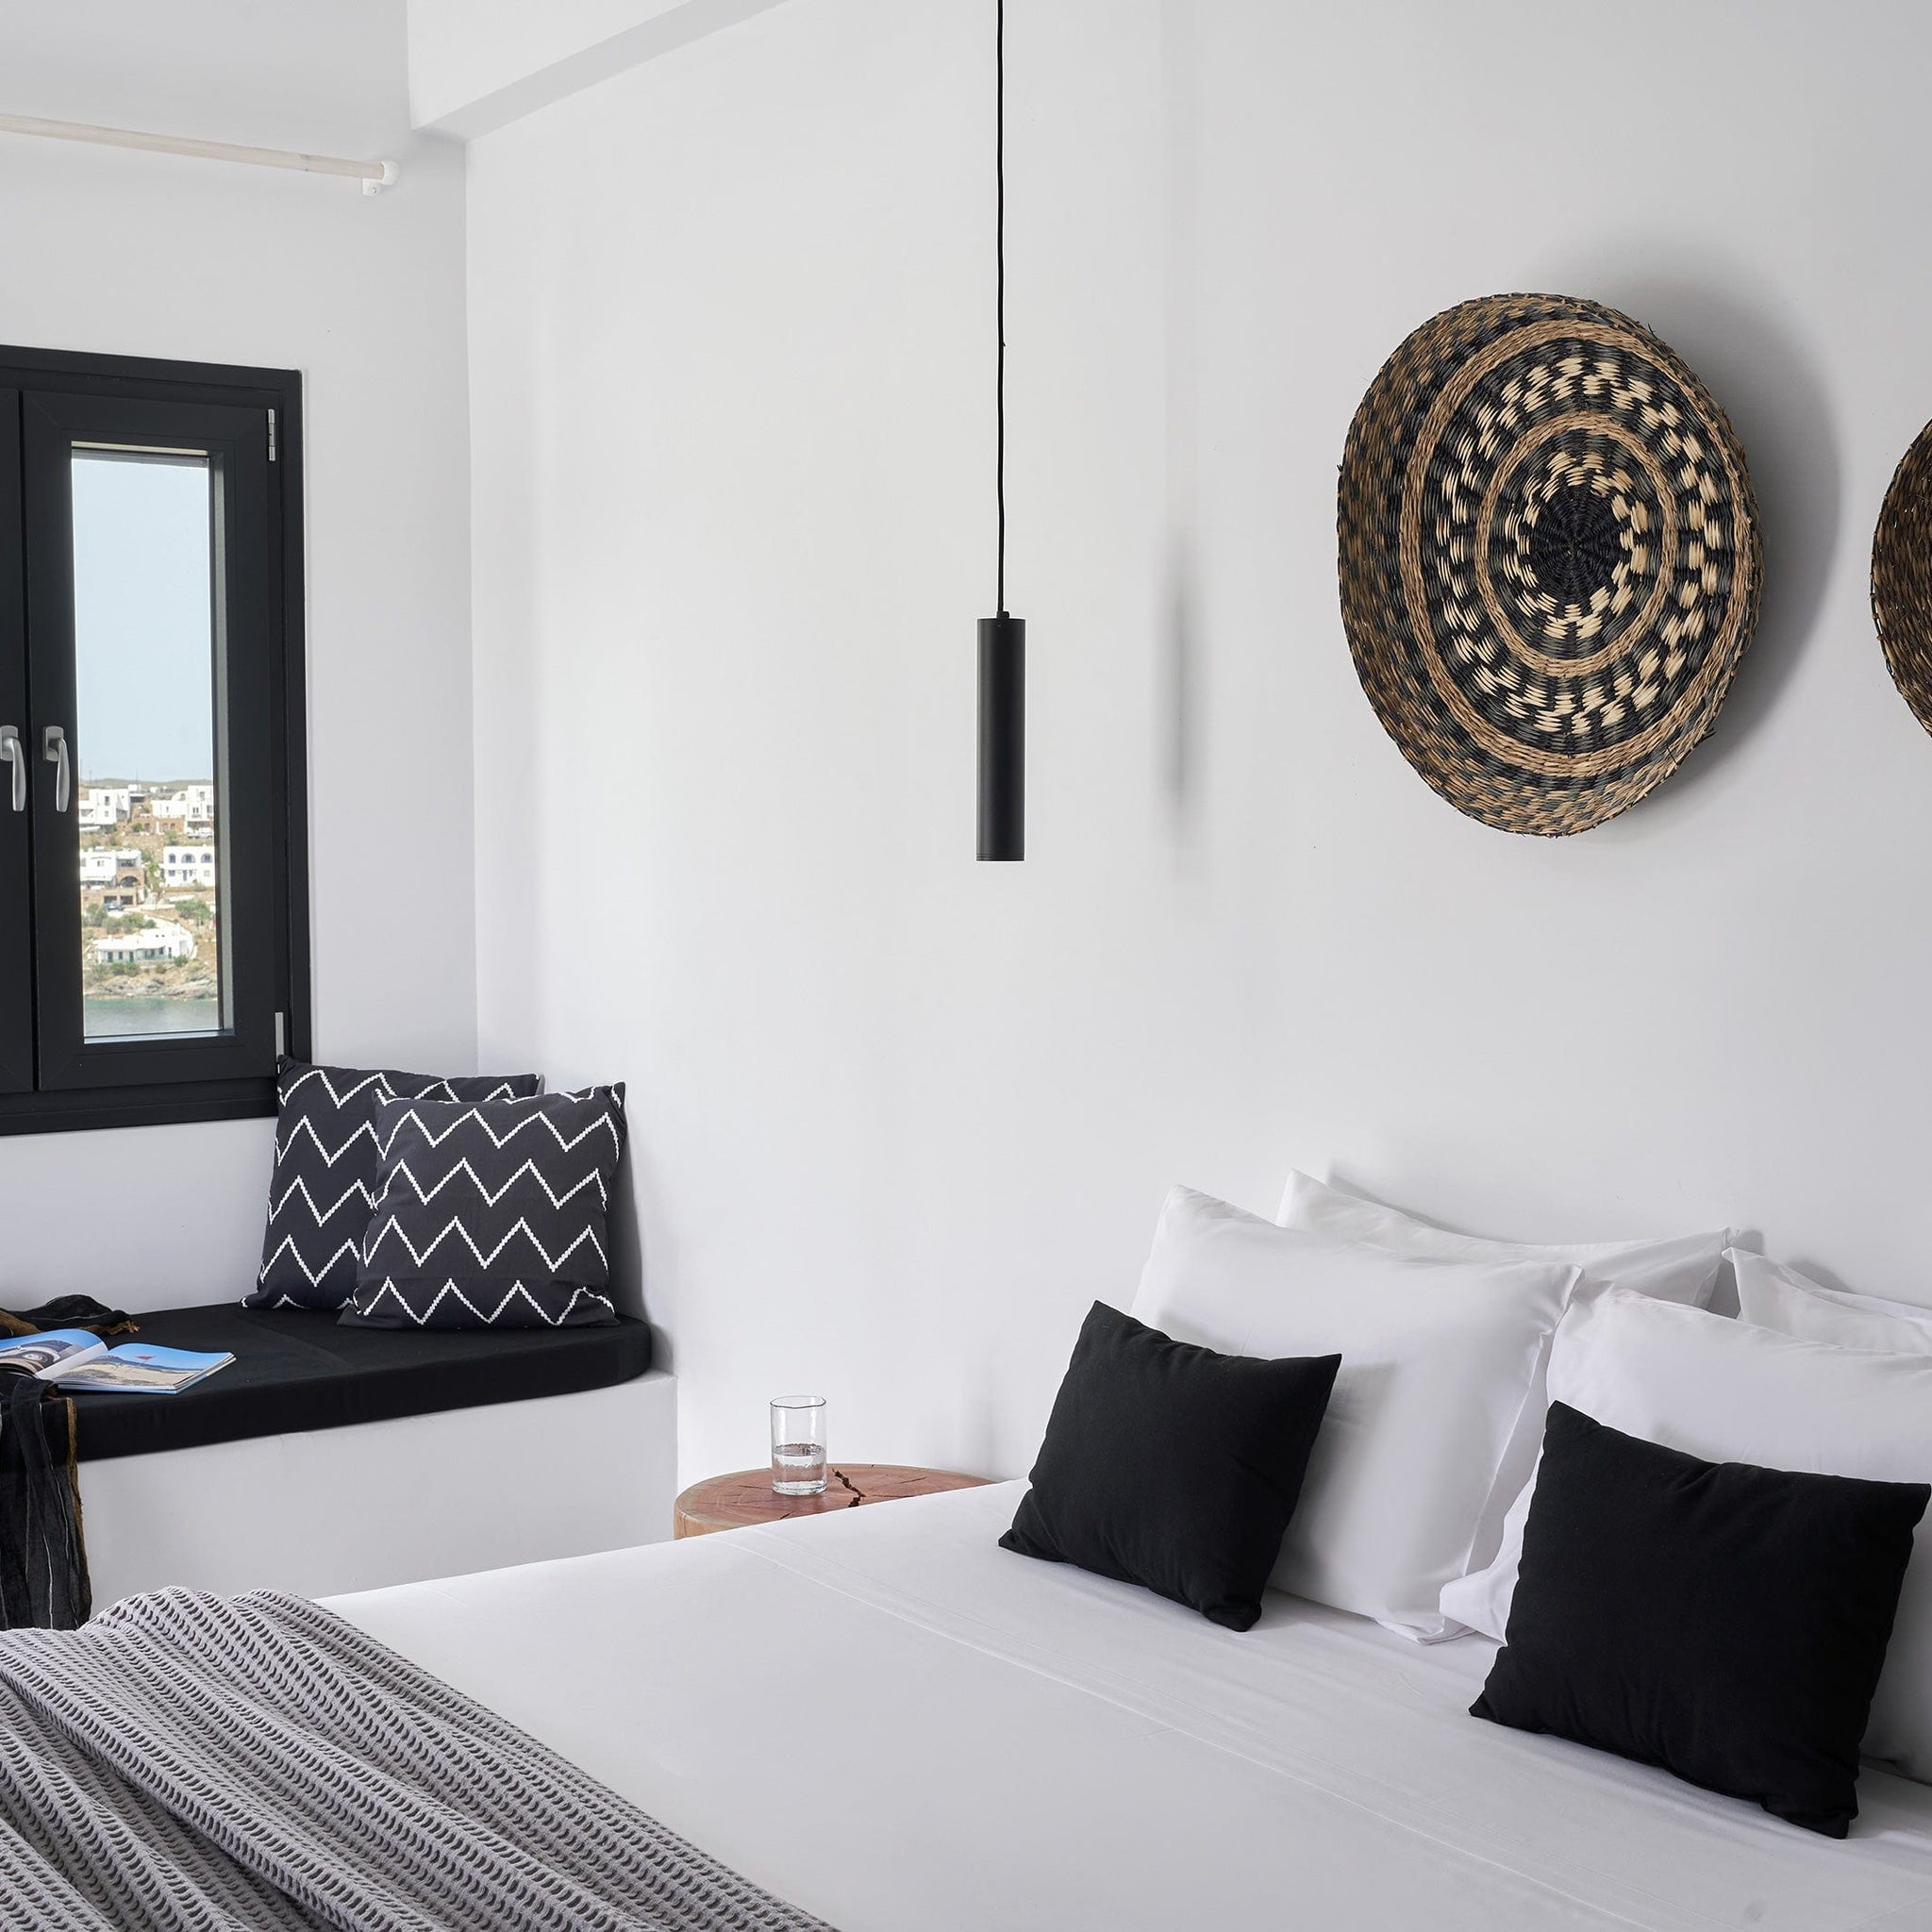 Thermia Suites Boutique Hotel Kythnos Island Greece Deluxe Double Room with Sea View